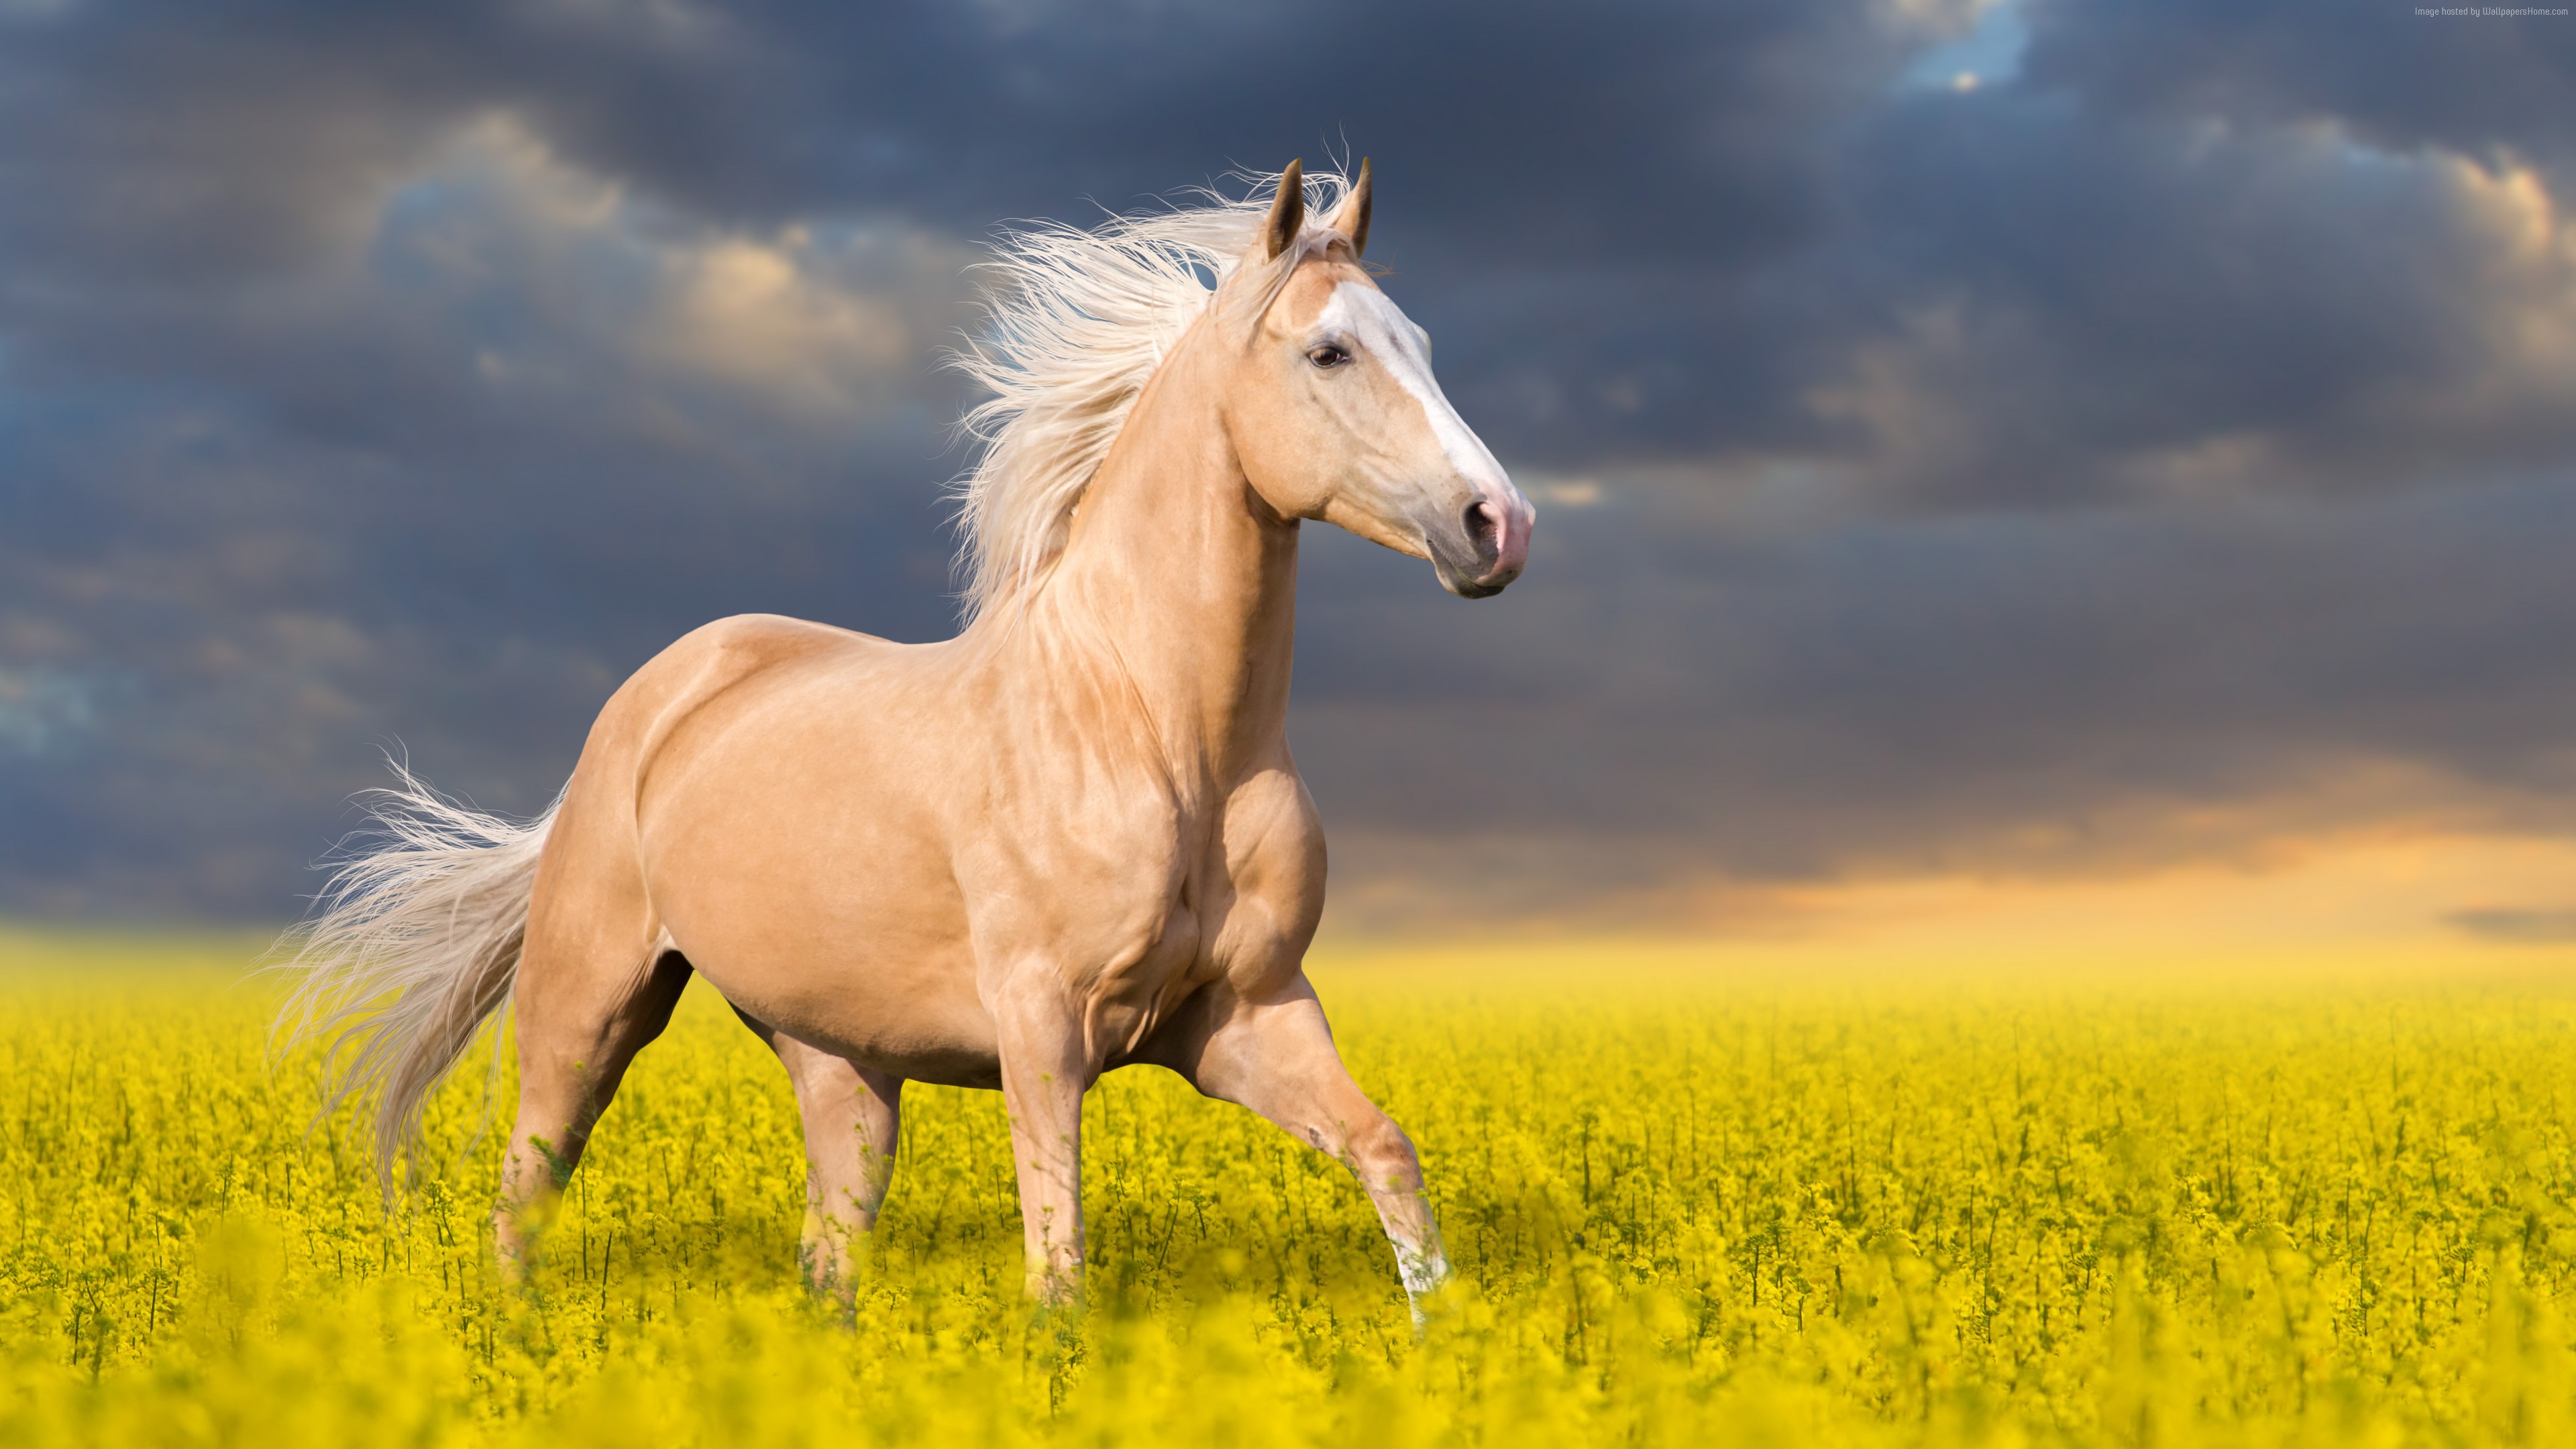 Stock Images Horse, cute animals, 5k, Stock Images